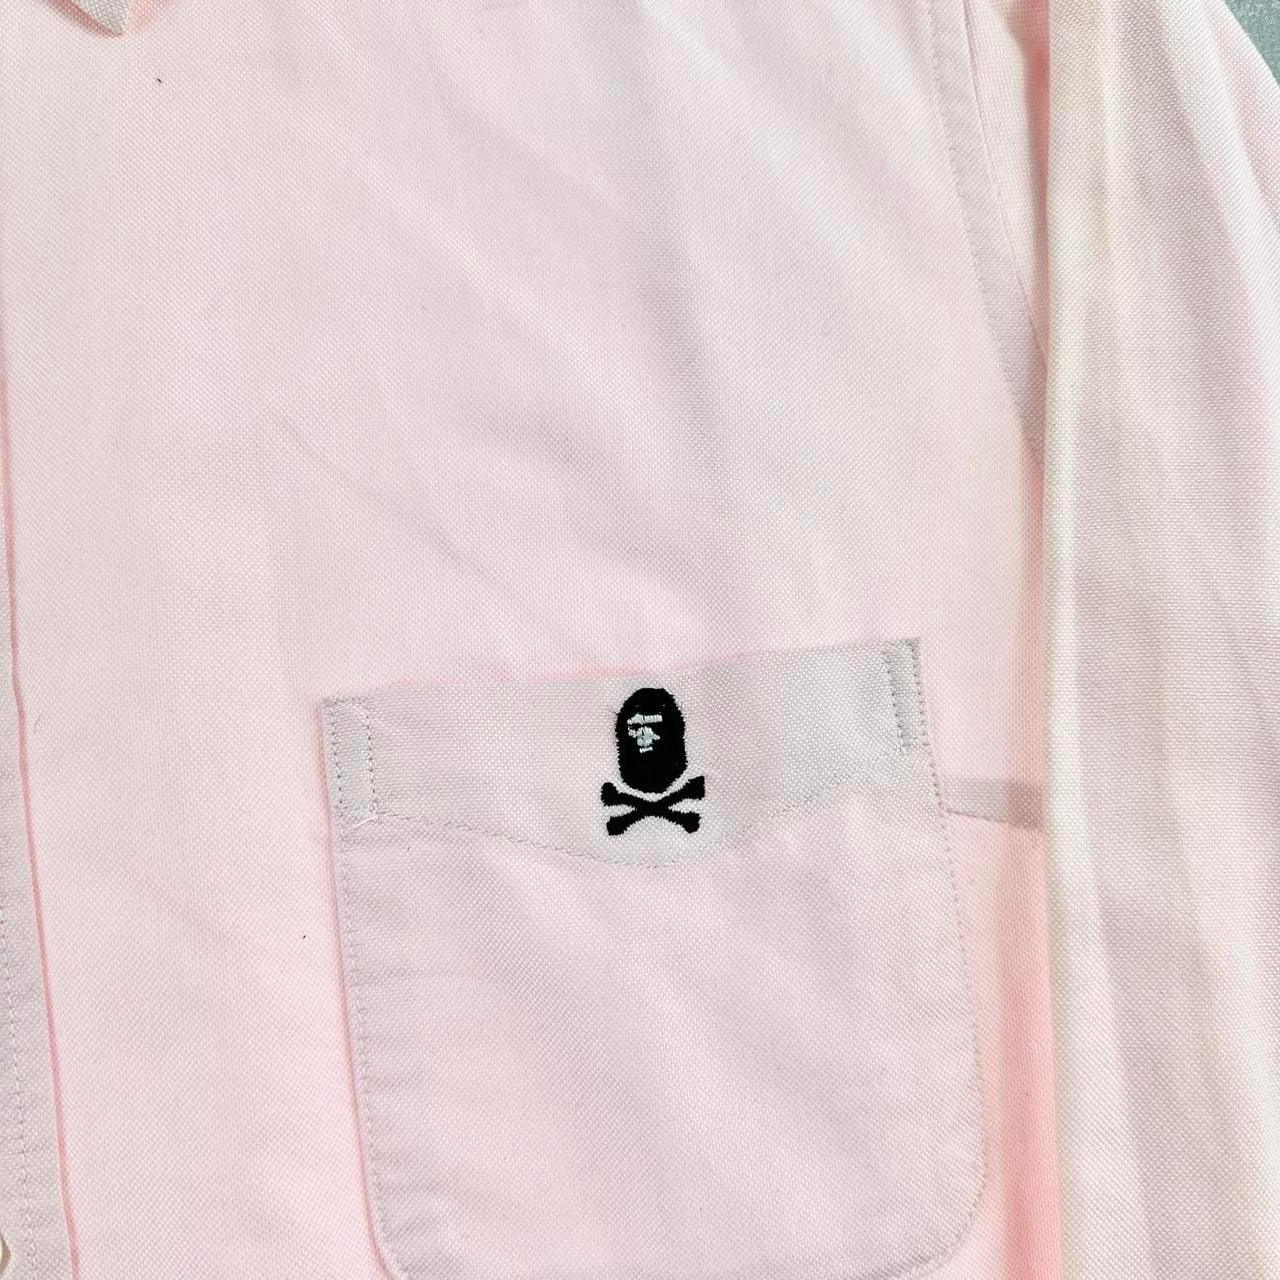 Bape pirate store button shirt size S - Known Source